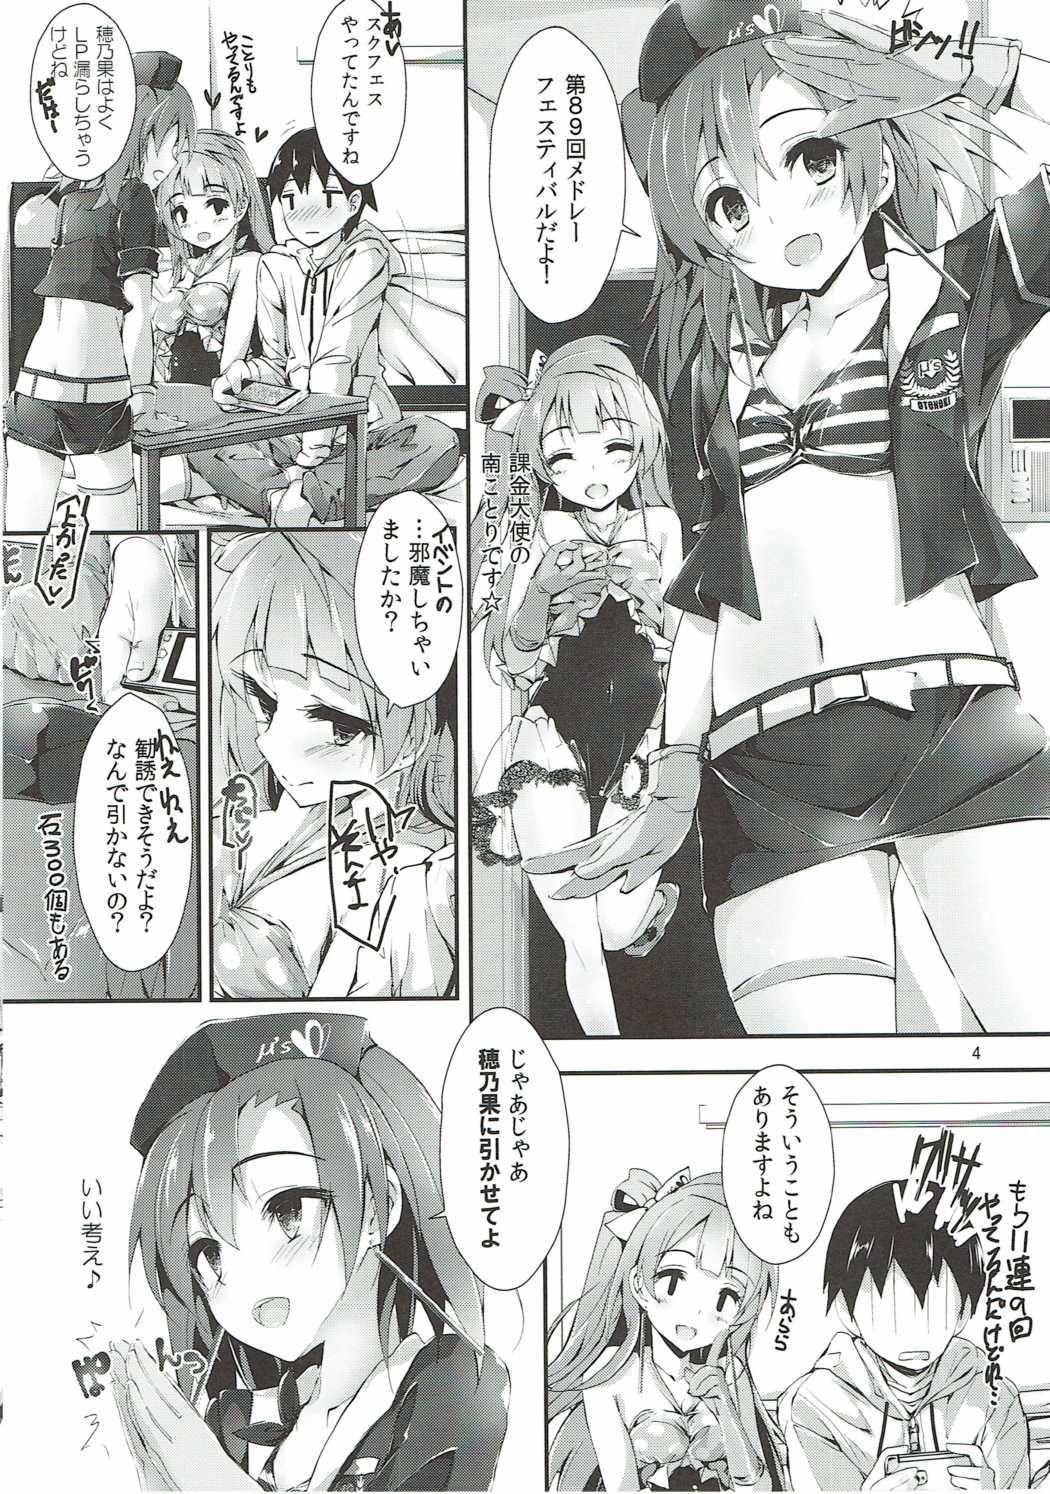 Buttfucking No regred payls - Love live Insertion - Page 3